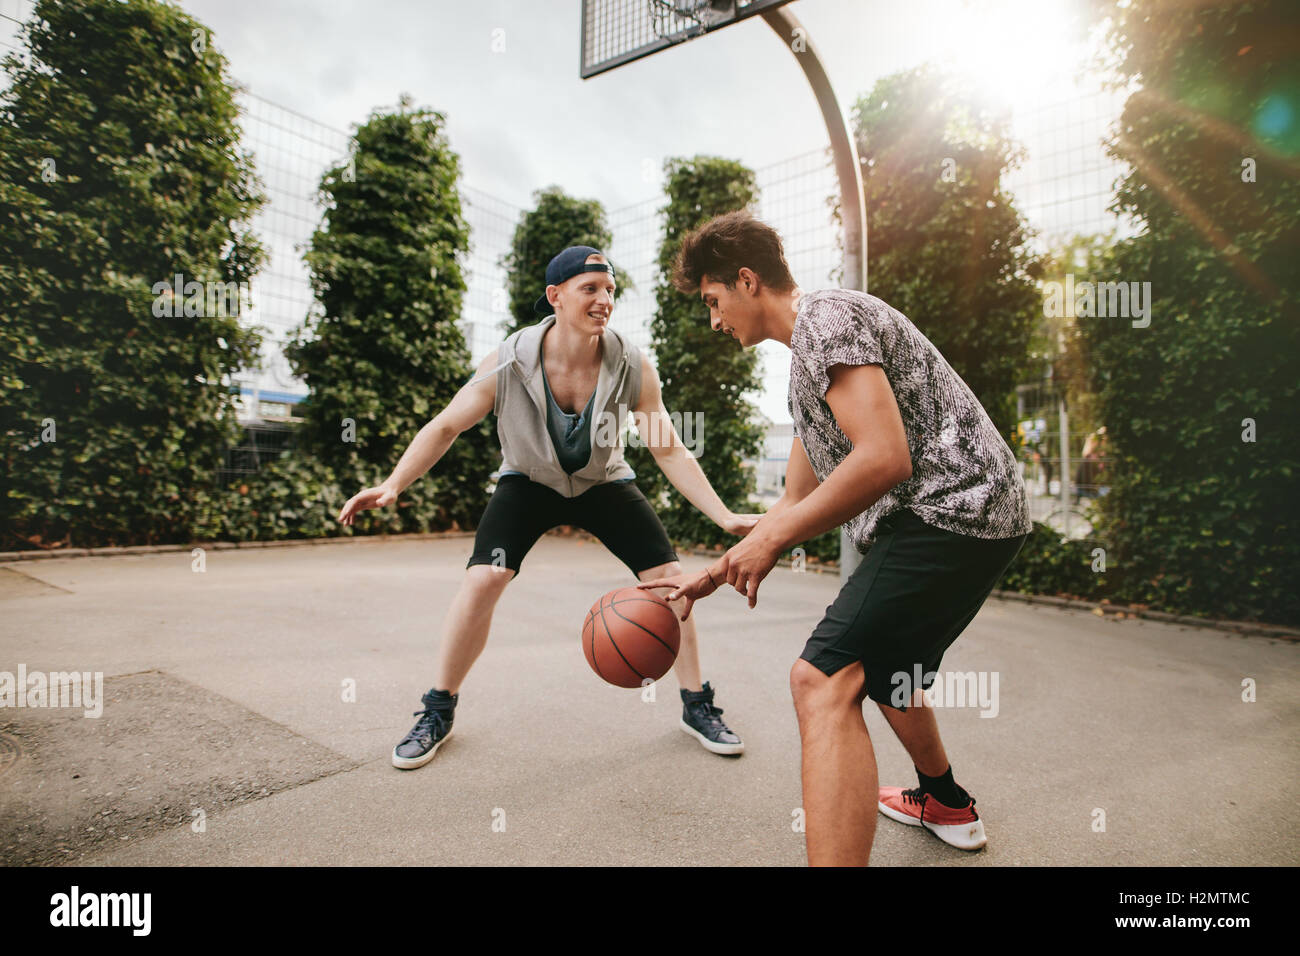 Teenagers playing basketball on outdoor court and having fun. Young man dribbling basketball with friend blocking. Stock Photo